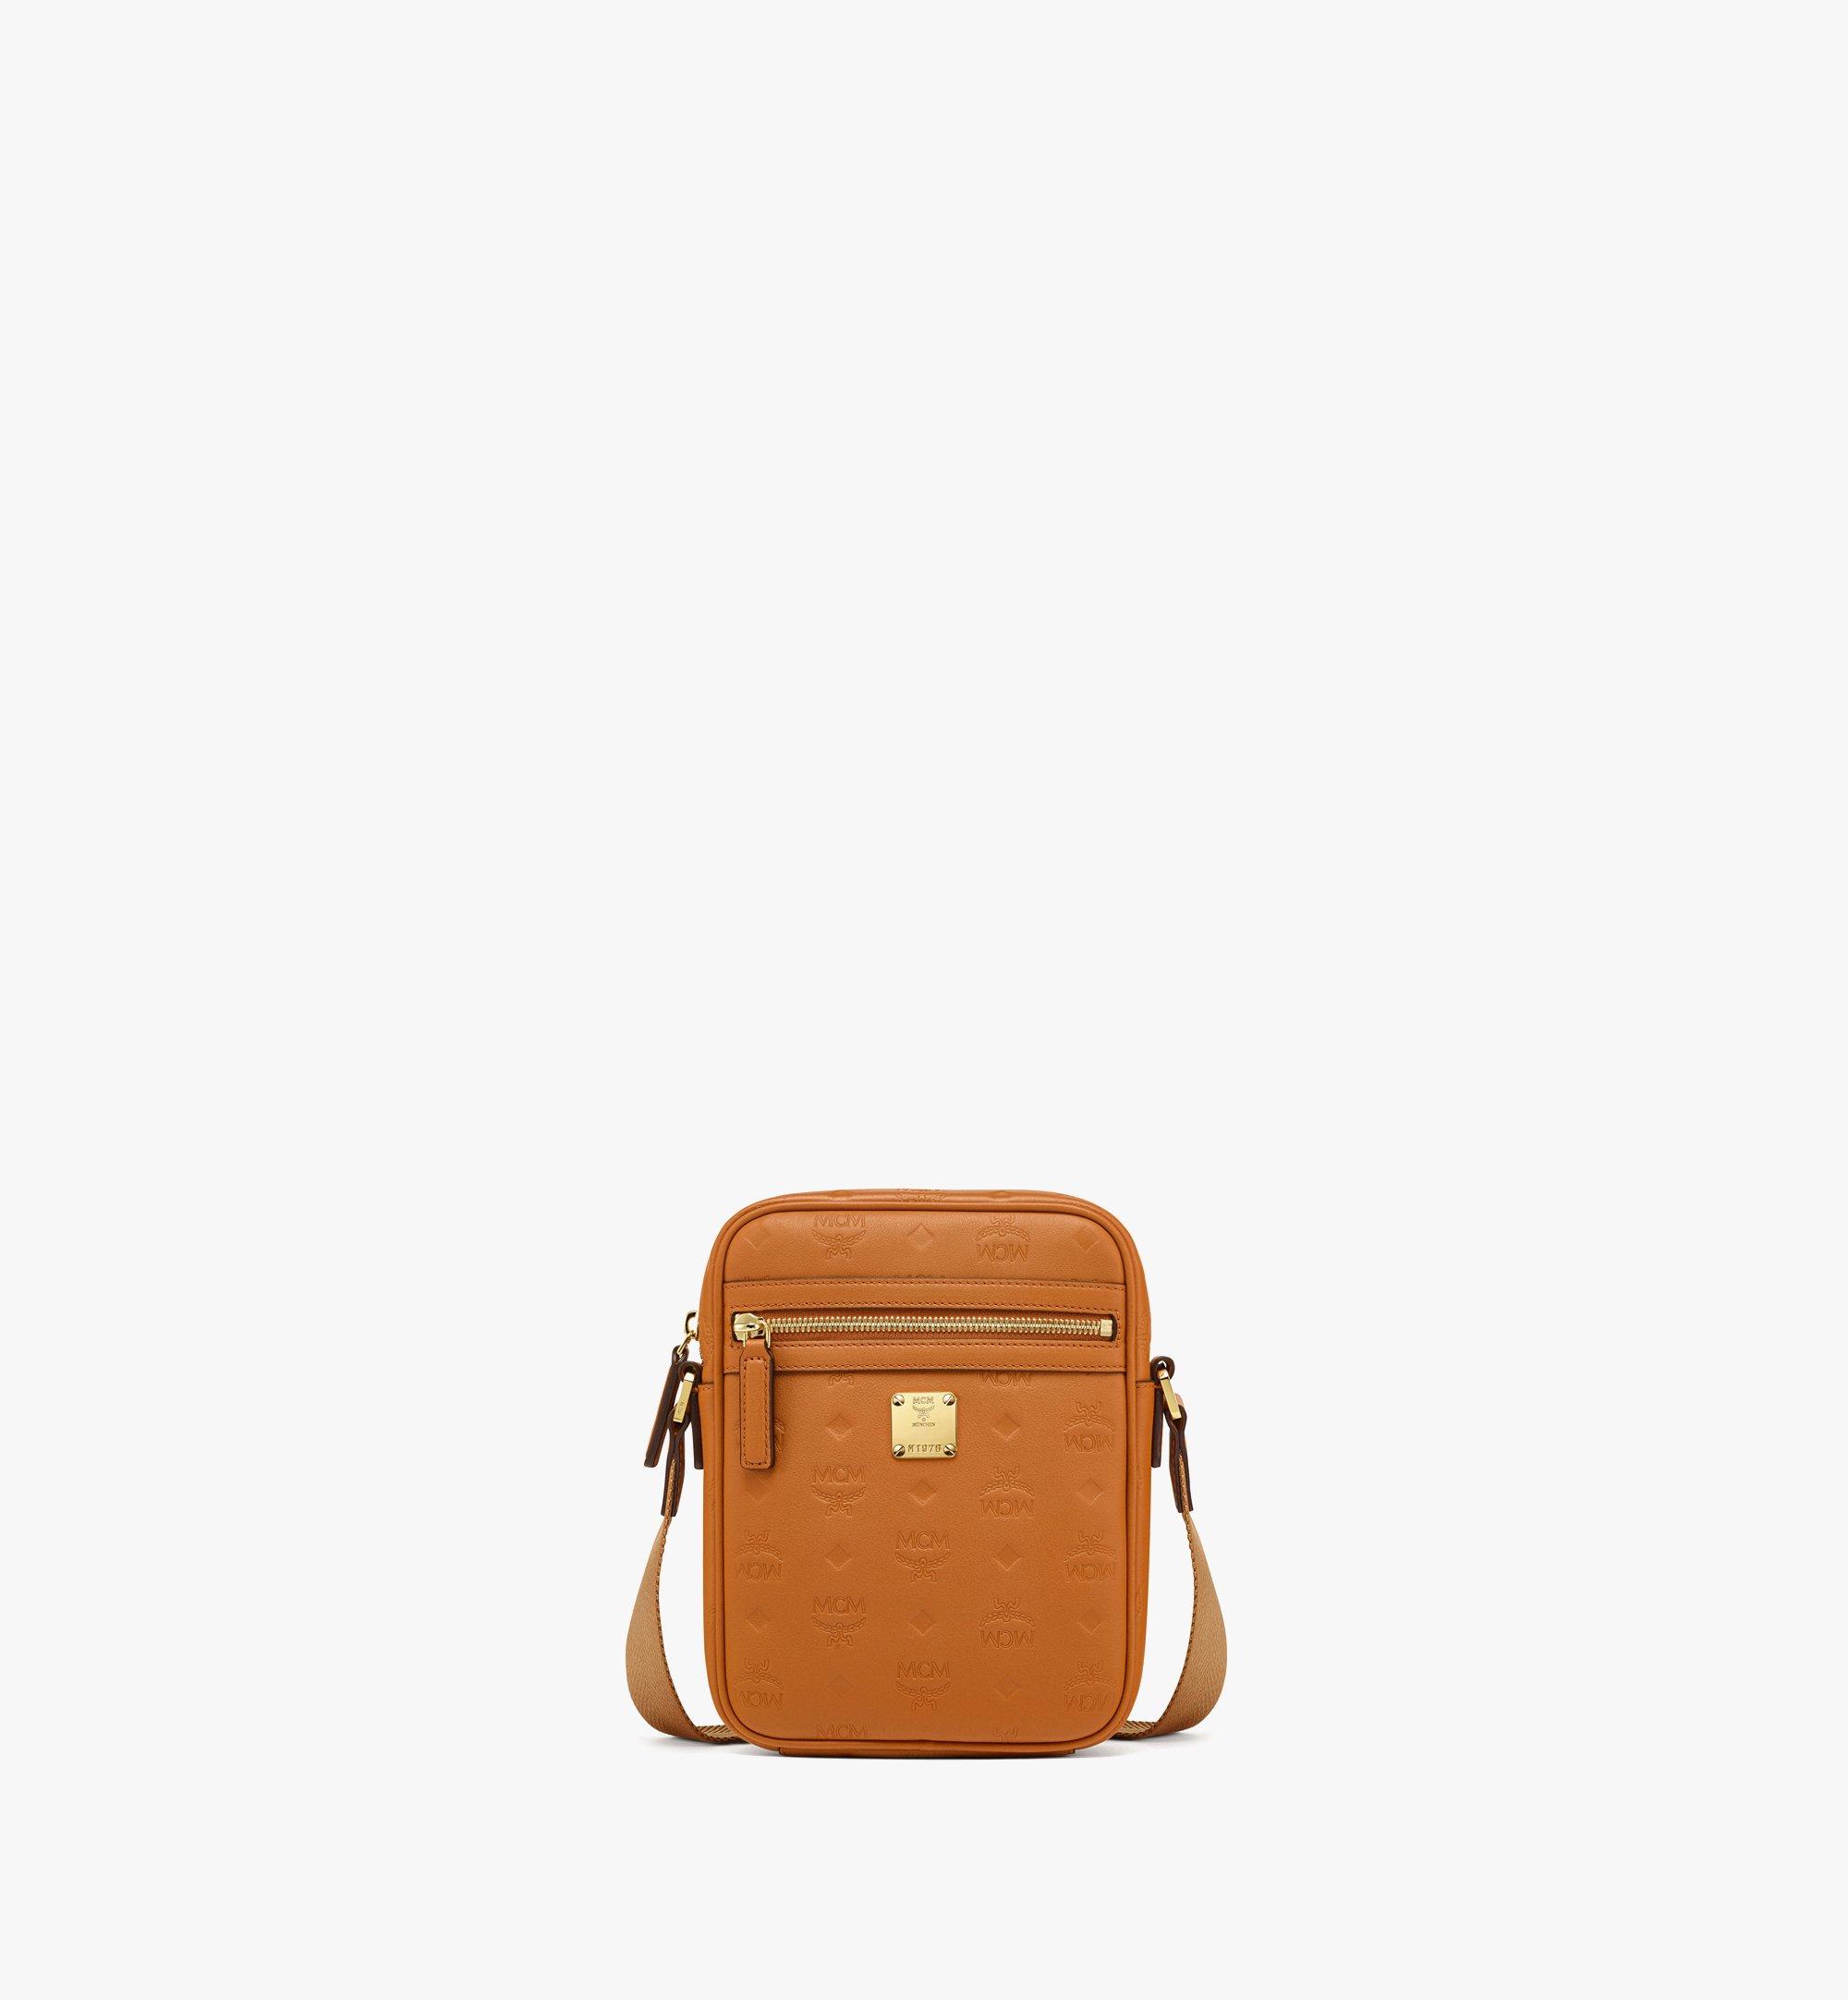 Designer Leather Bags For Women | MCM® US